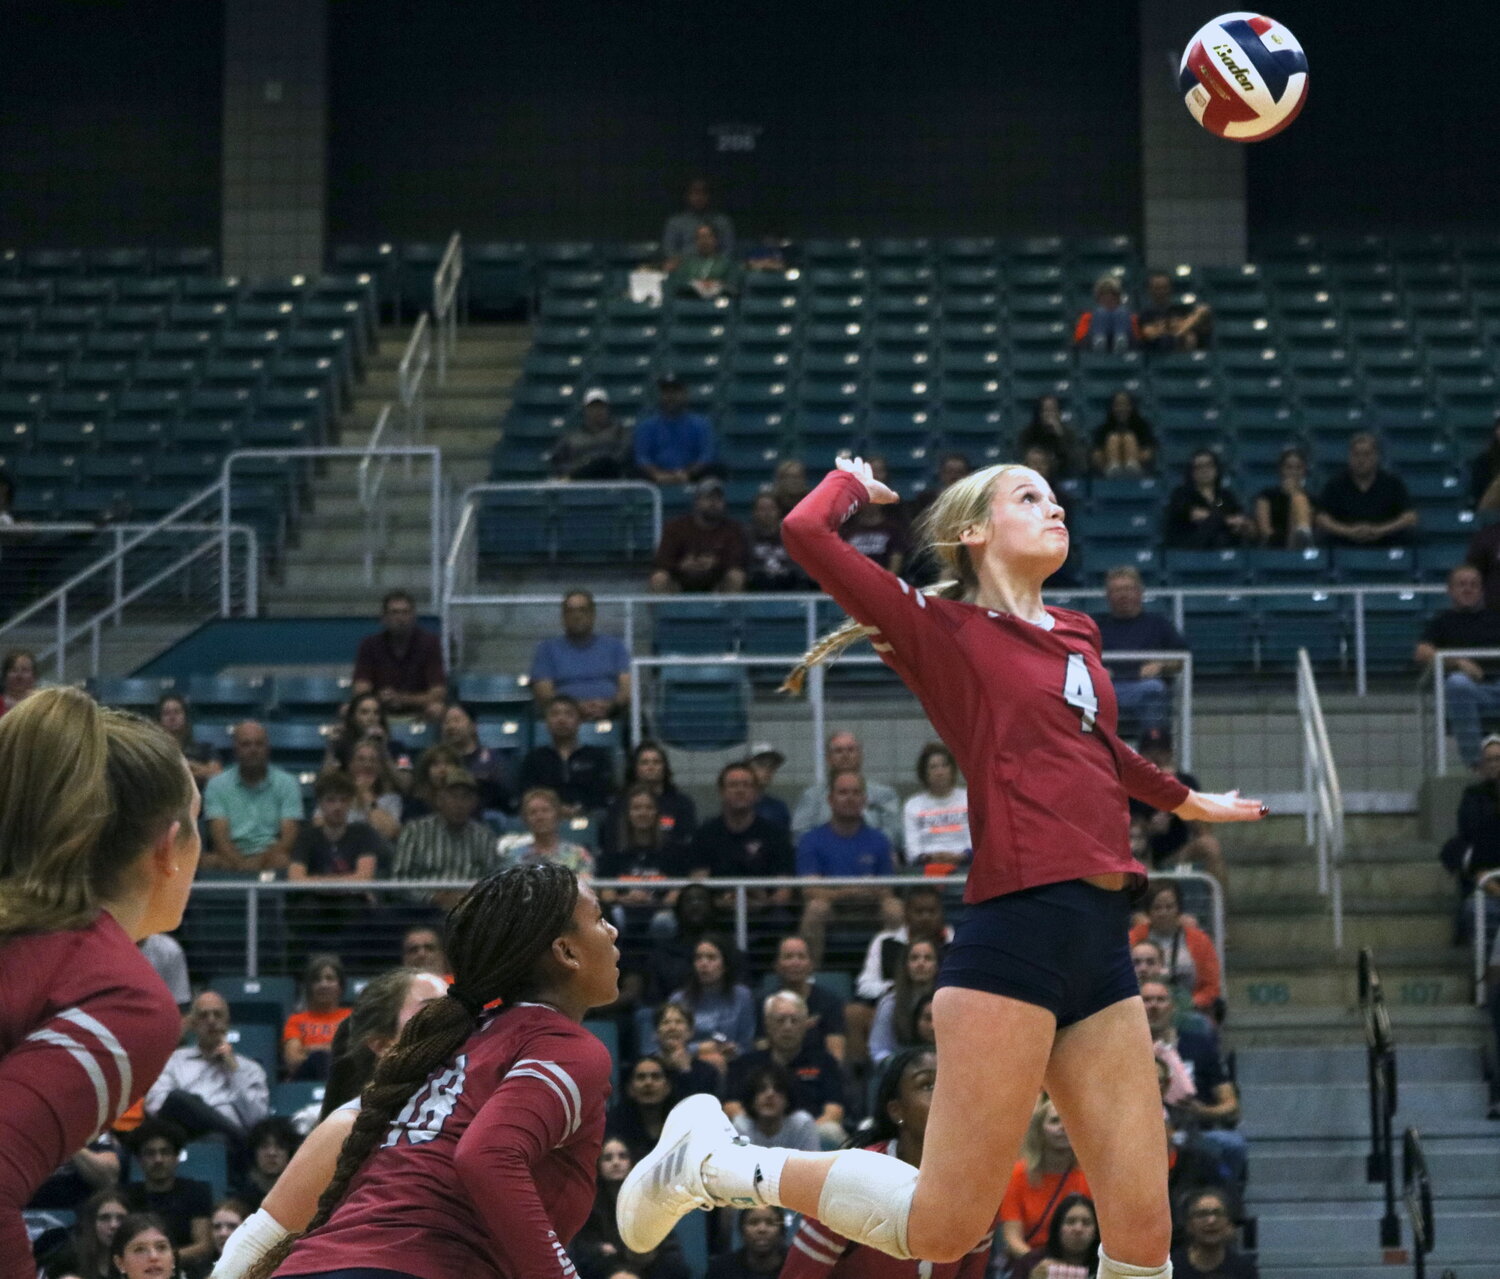 Tompkins’ Callie Funk spikes the ball during Tuesday’s match between Seven Lakes and Tompkins at the Merrell Center.